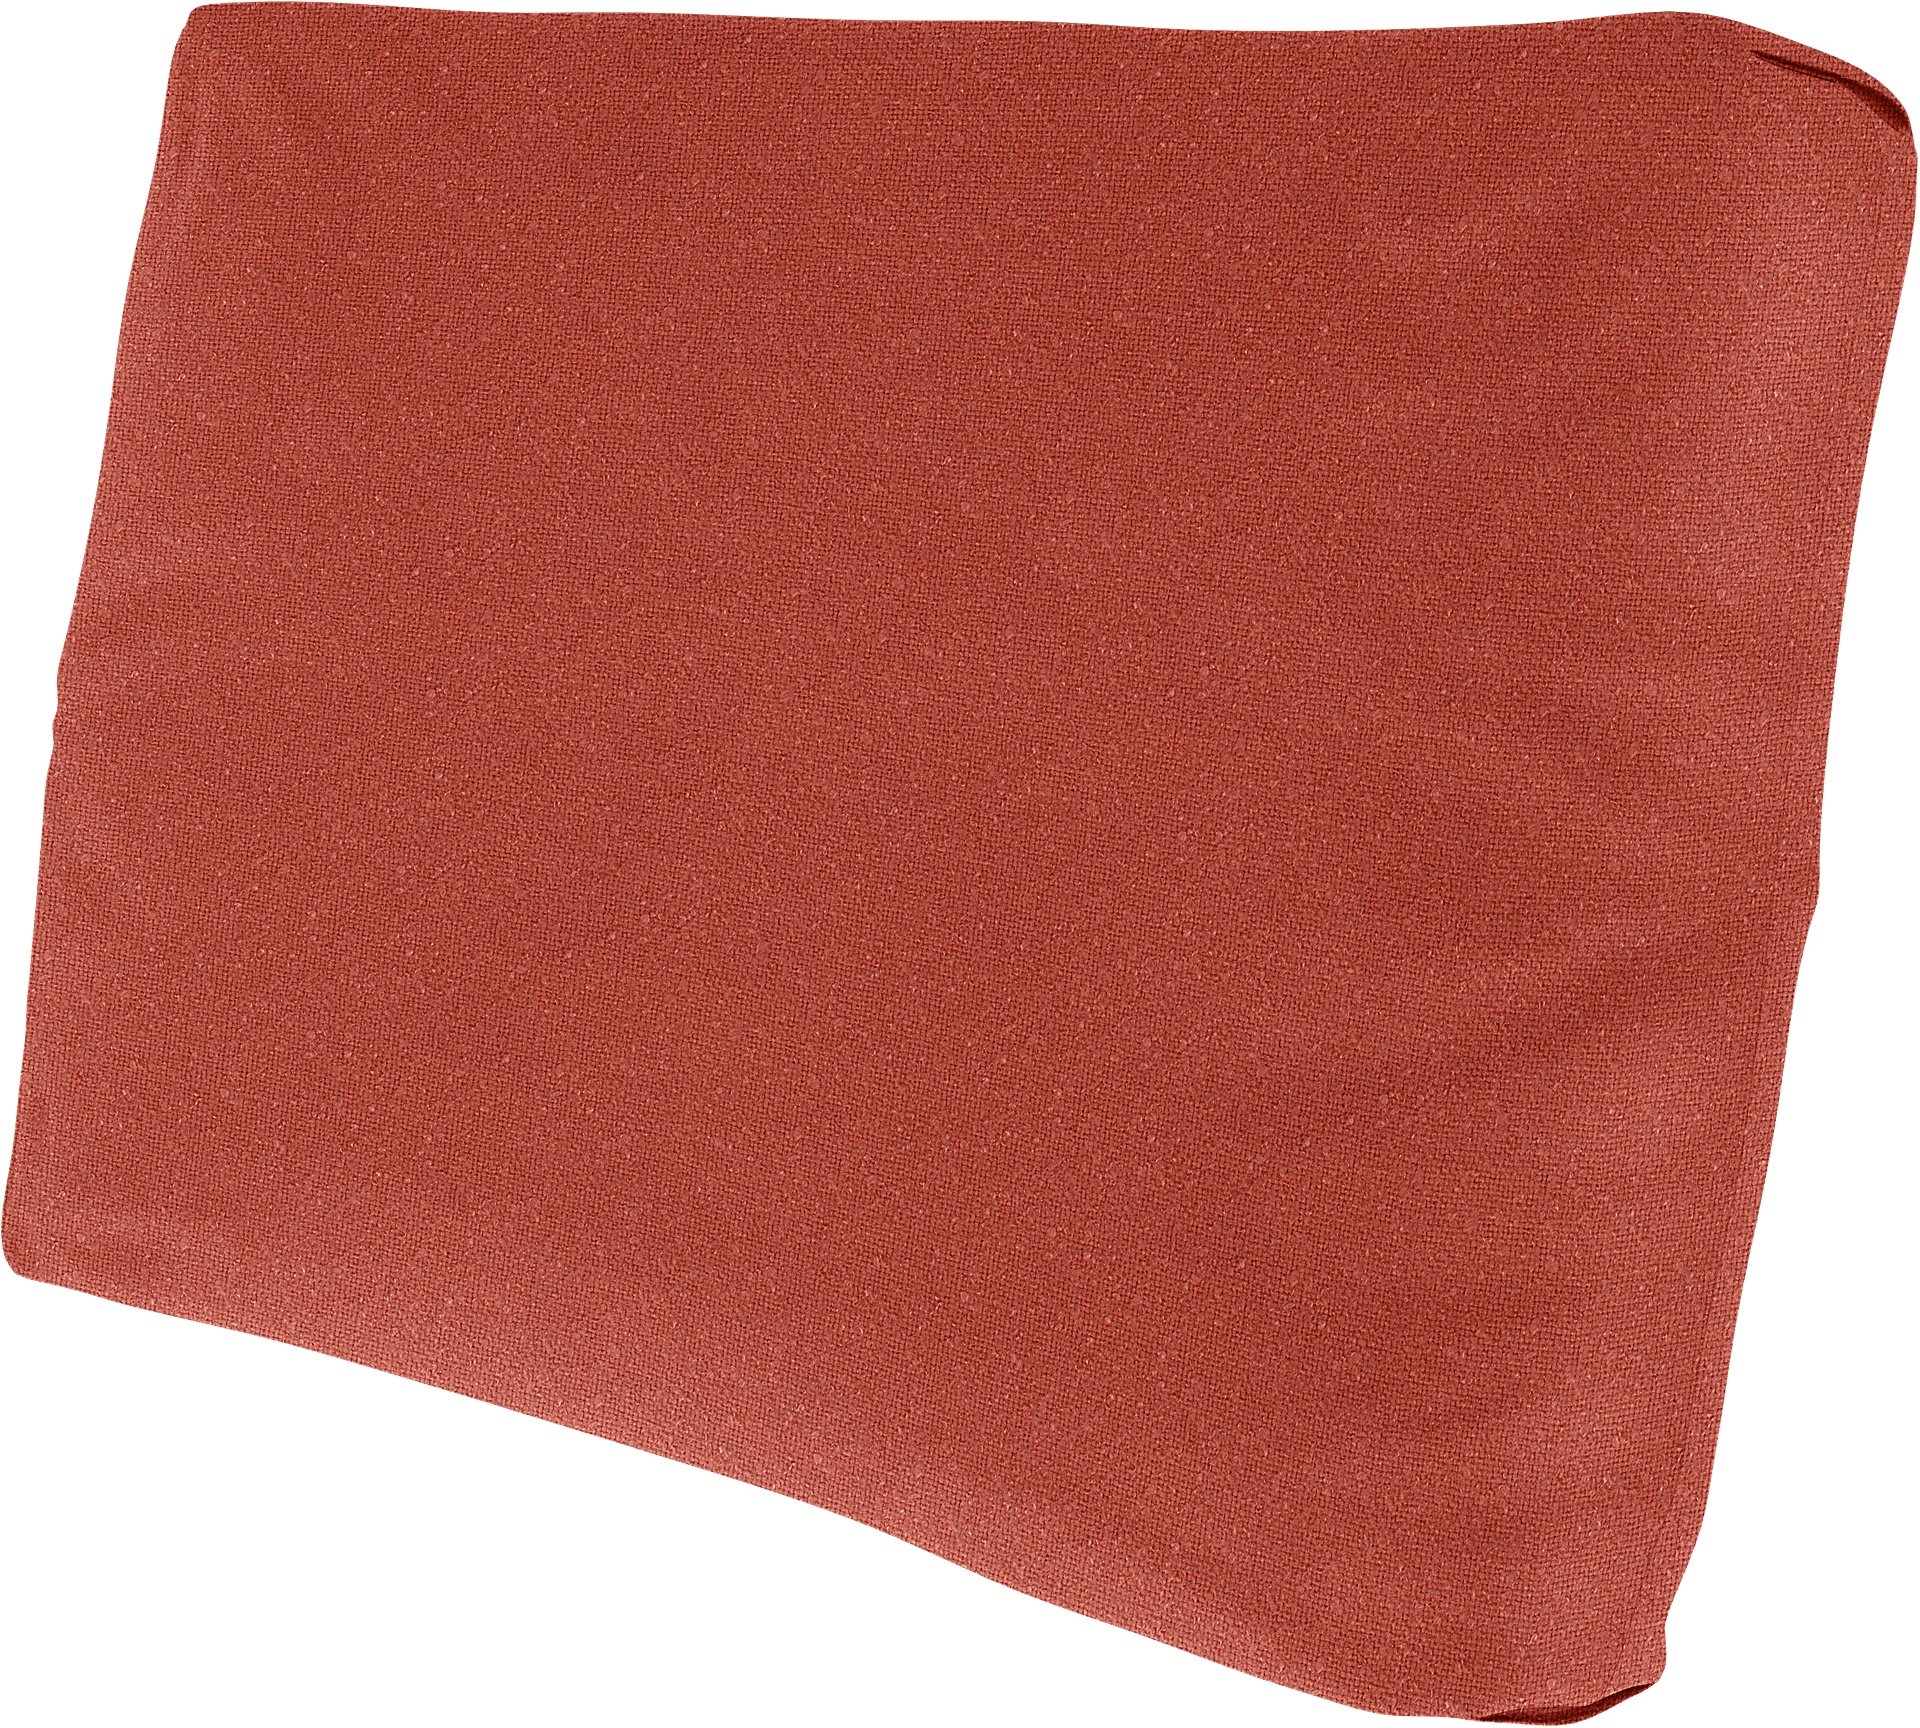 IKEA - EXTRA BACK CUSHION COVER FRIHETEN 47X67CM, Coral Red, Outdoor - Bemz